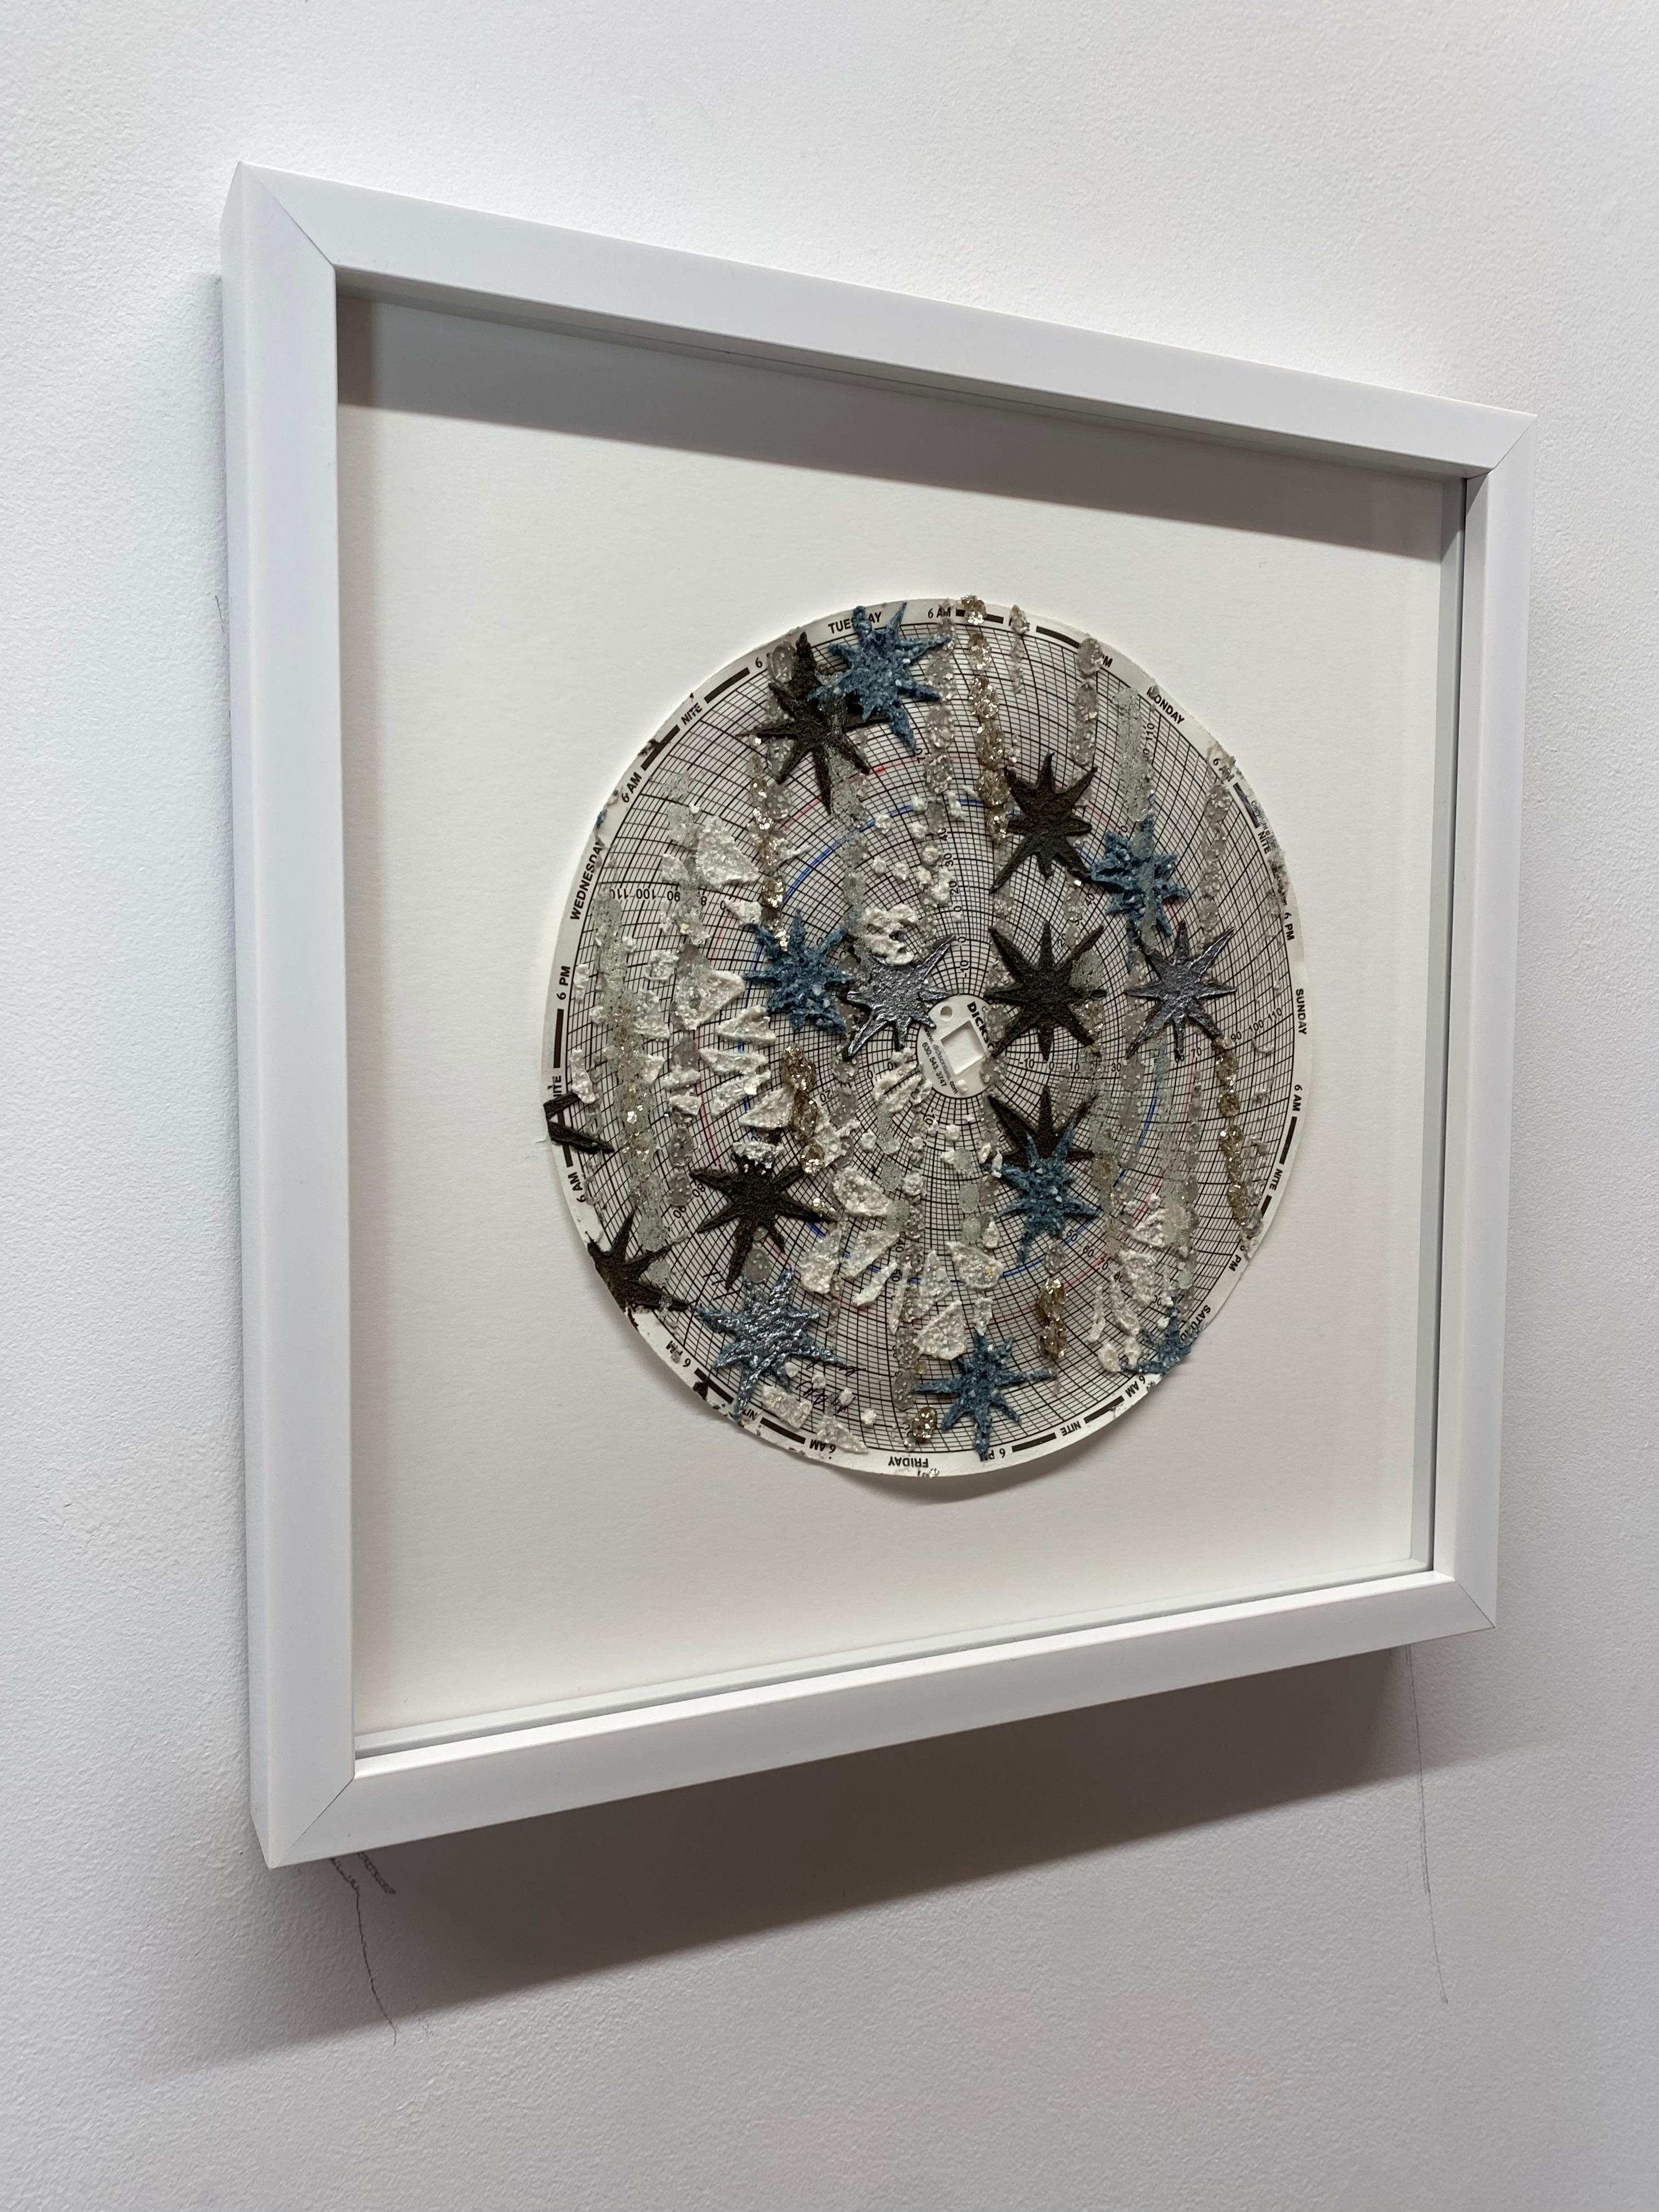 Untitled Stars Two, Abstract Textured Patterned Circle, Blue, Charcoal, Silver - Contemporary Mixed Media Art by Eleanor White